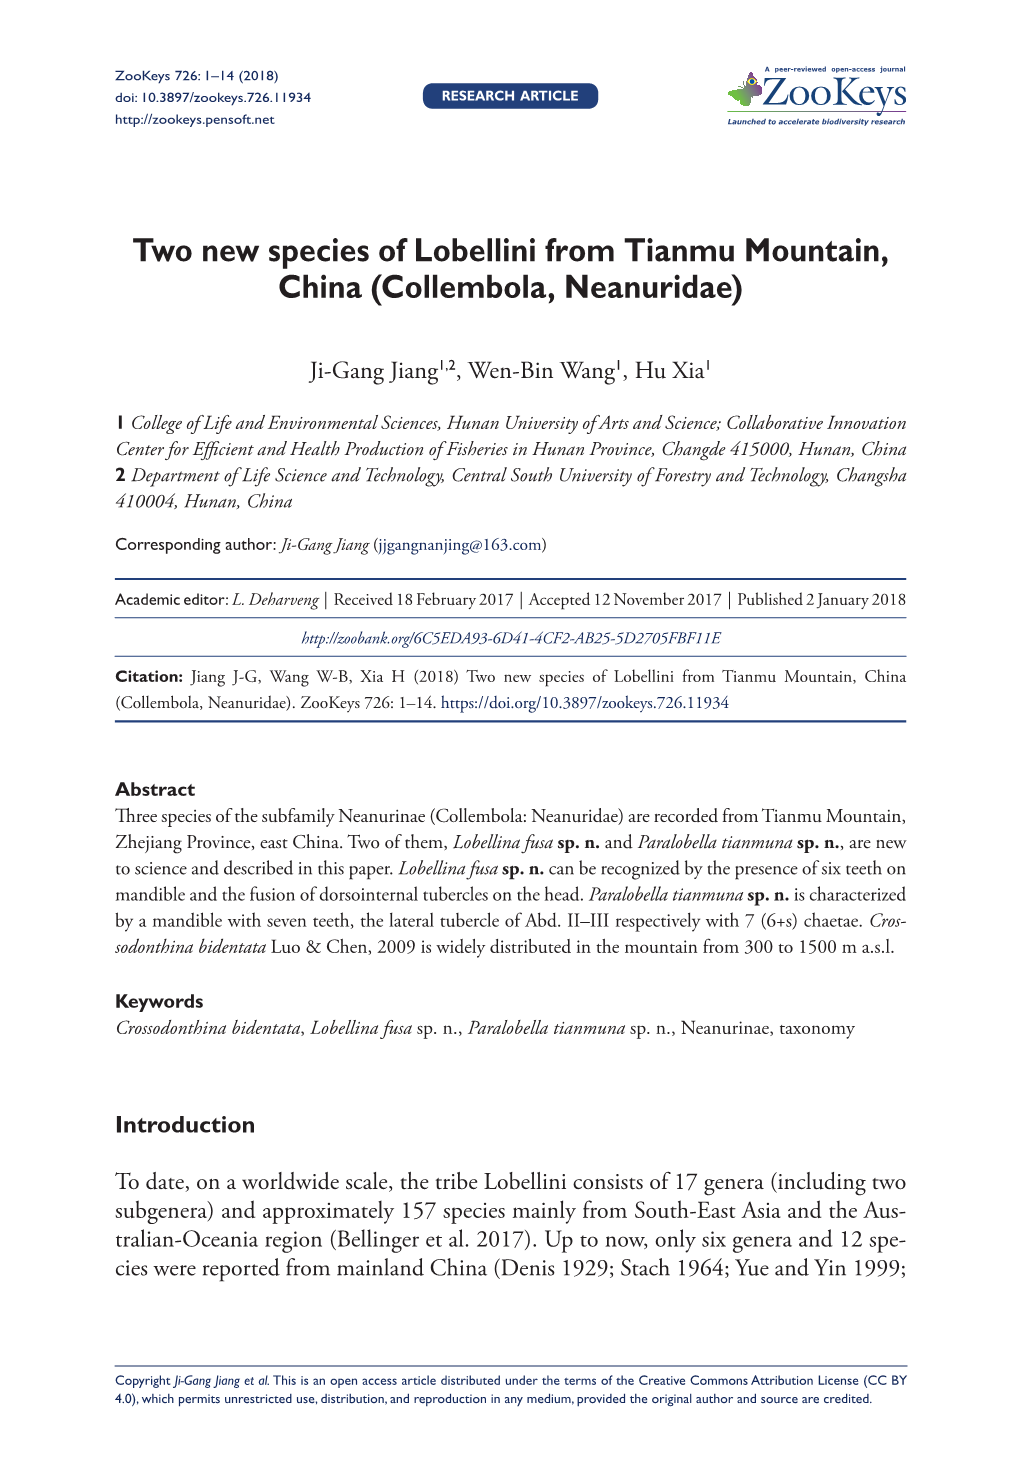 Two New Species of Lobellini from Tianmu Mountain, China (Collembola, Neanuridae)